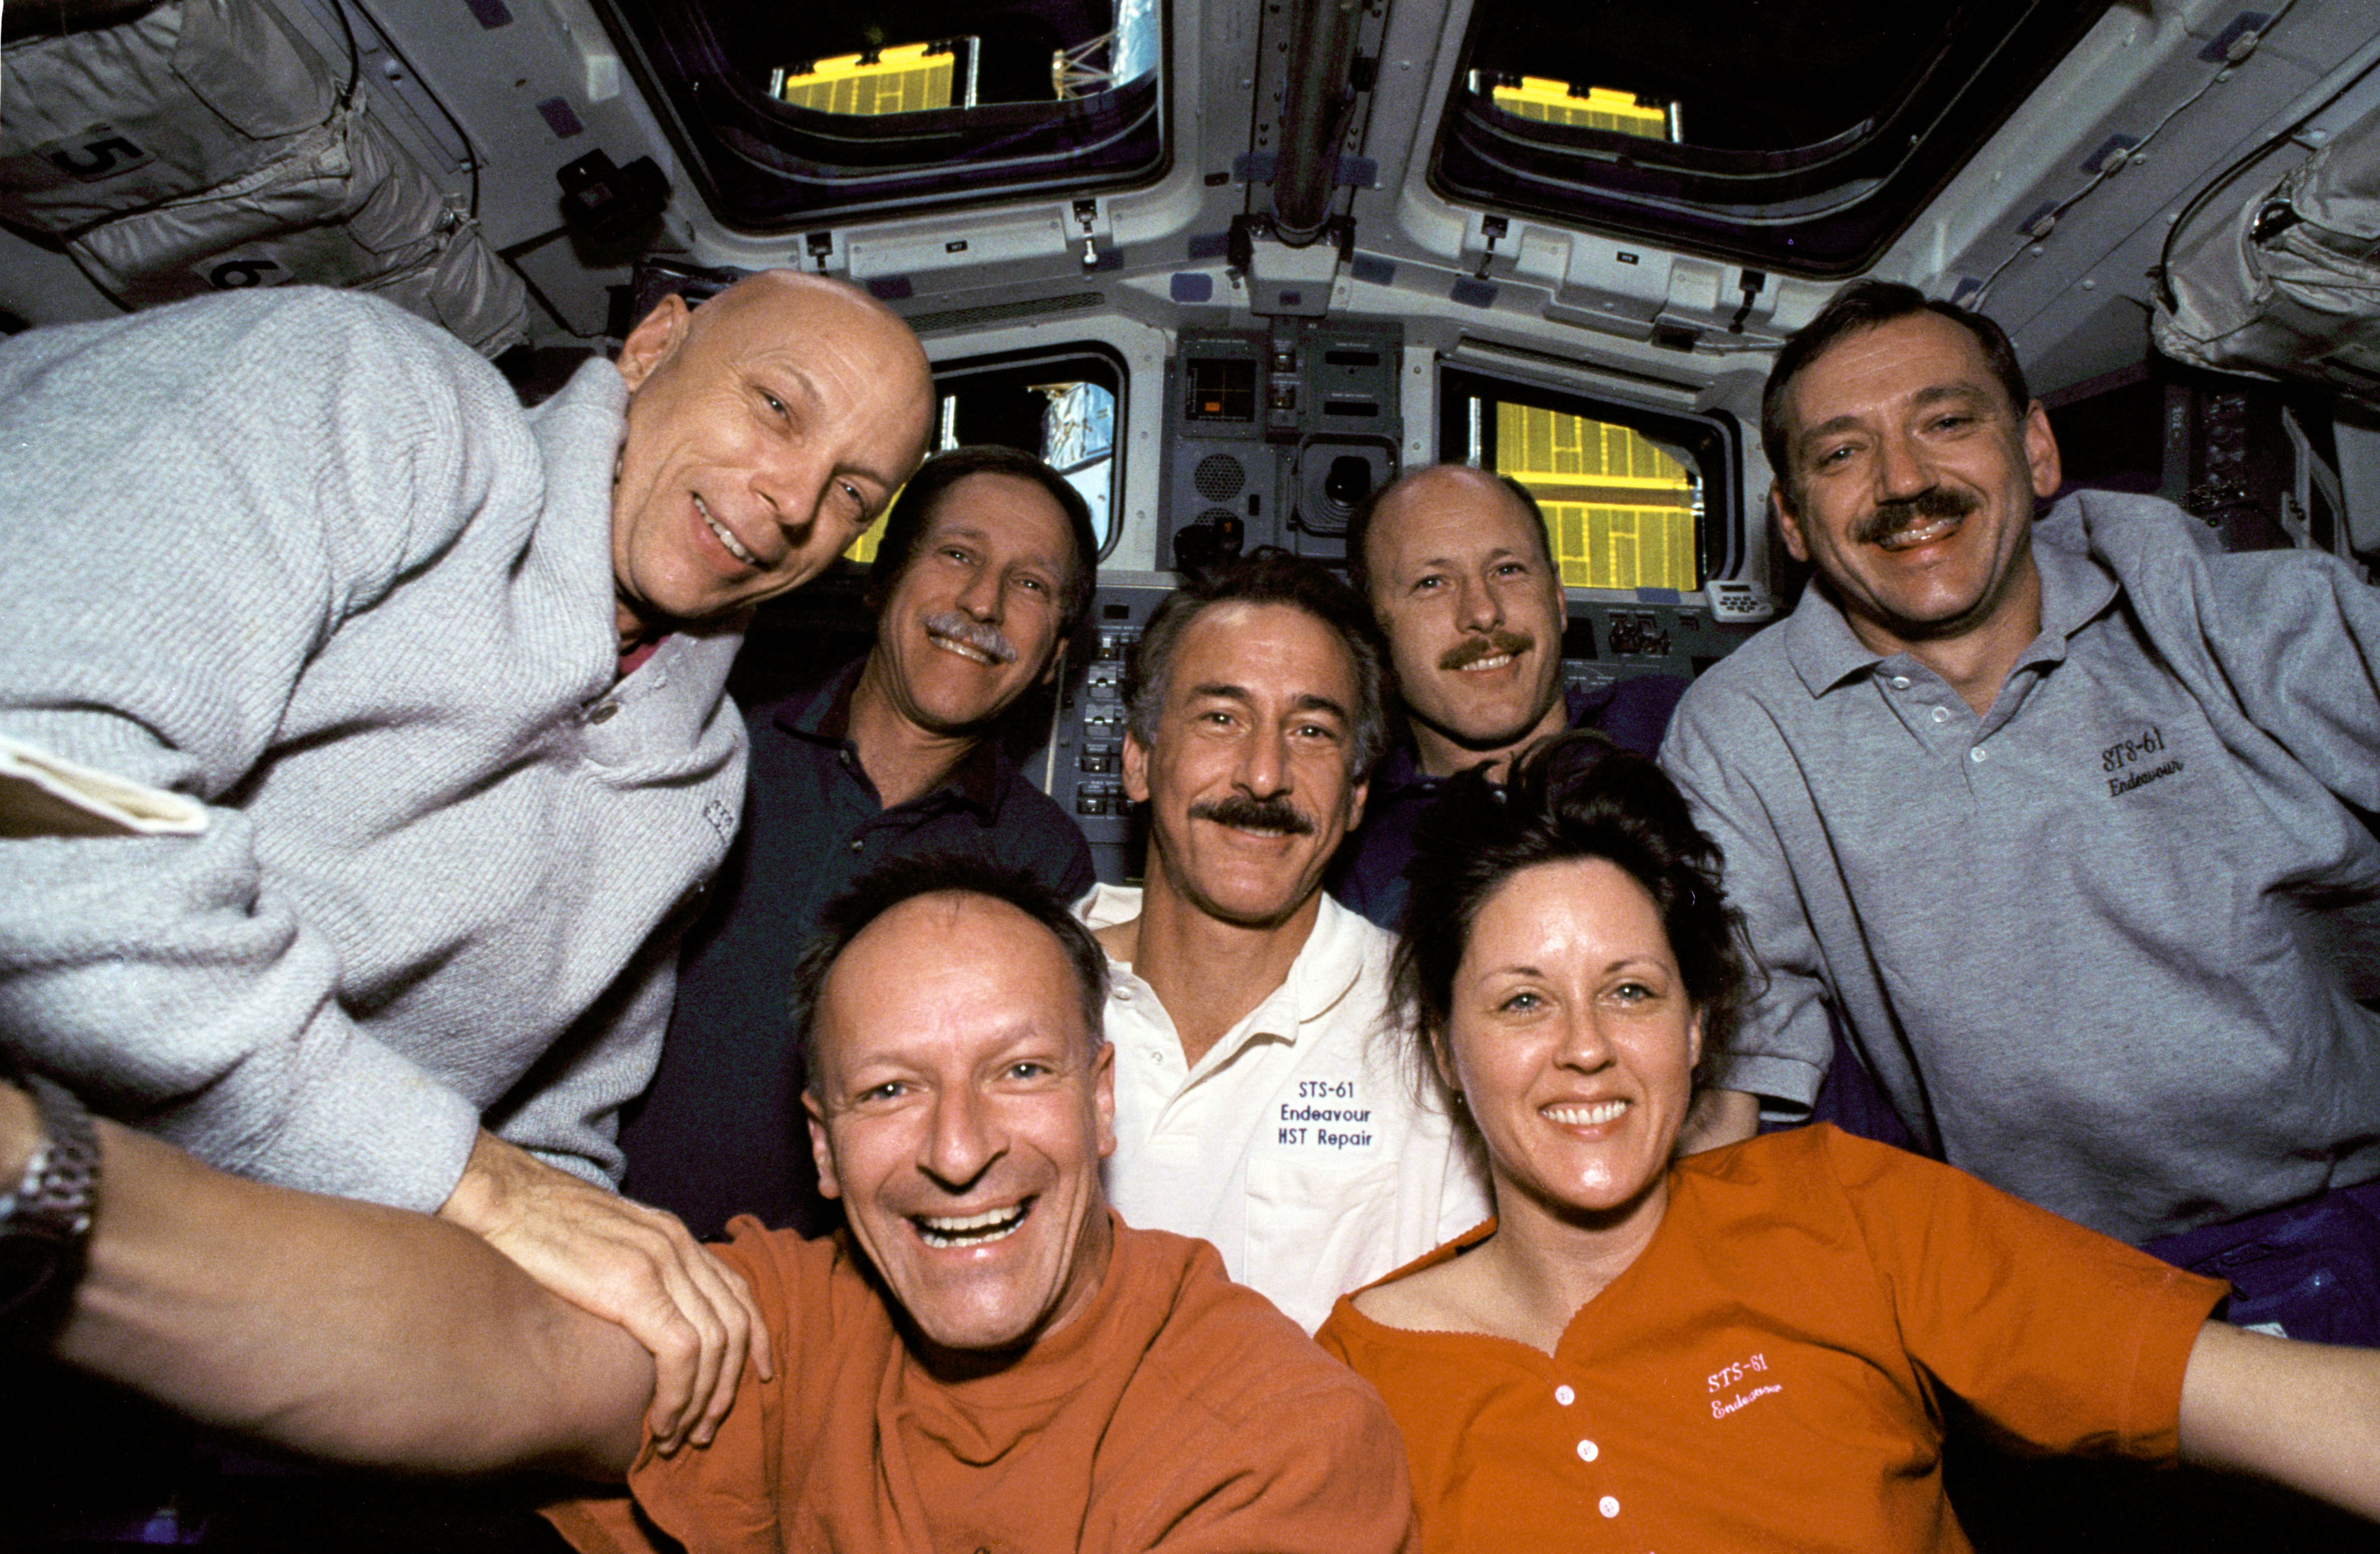 The crew of Hubble servicing mission 1 floats for a team picture.